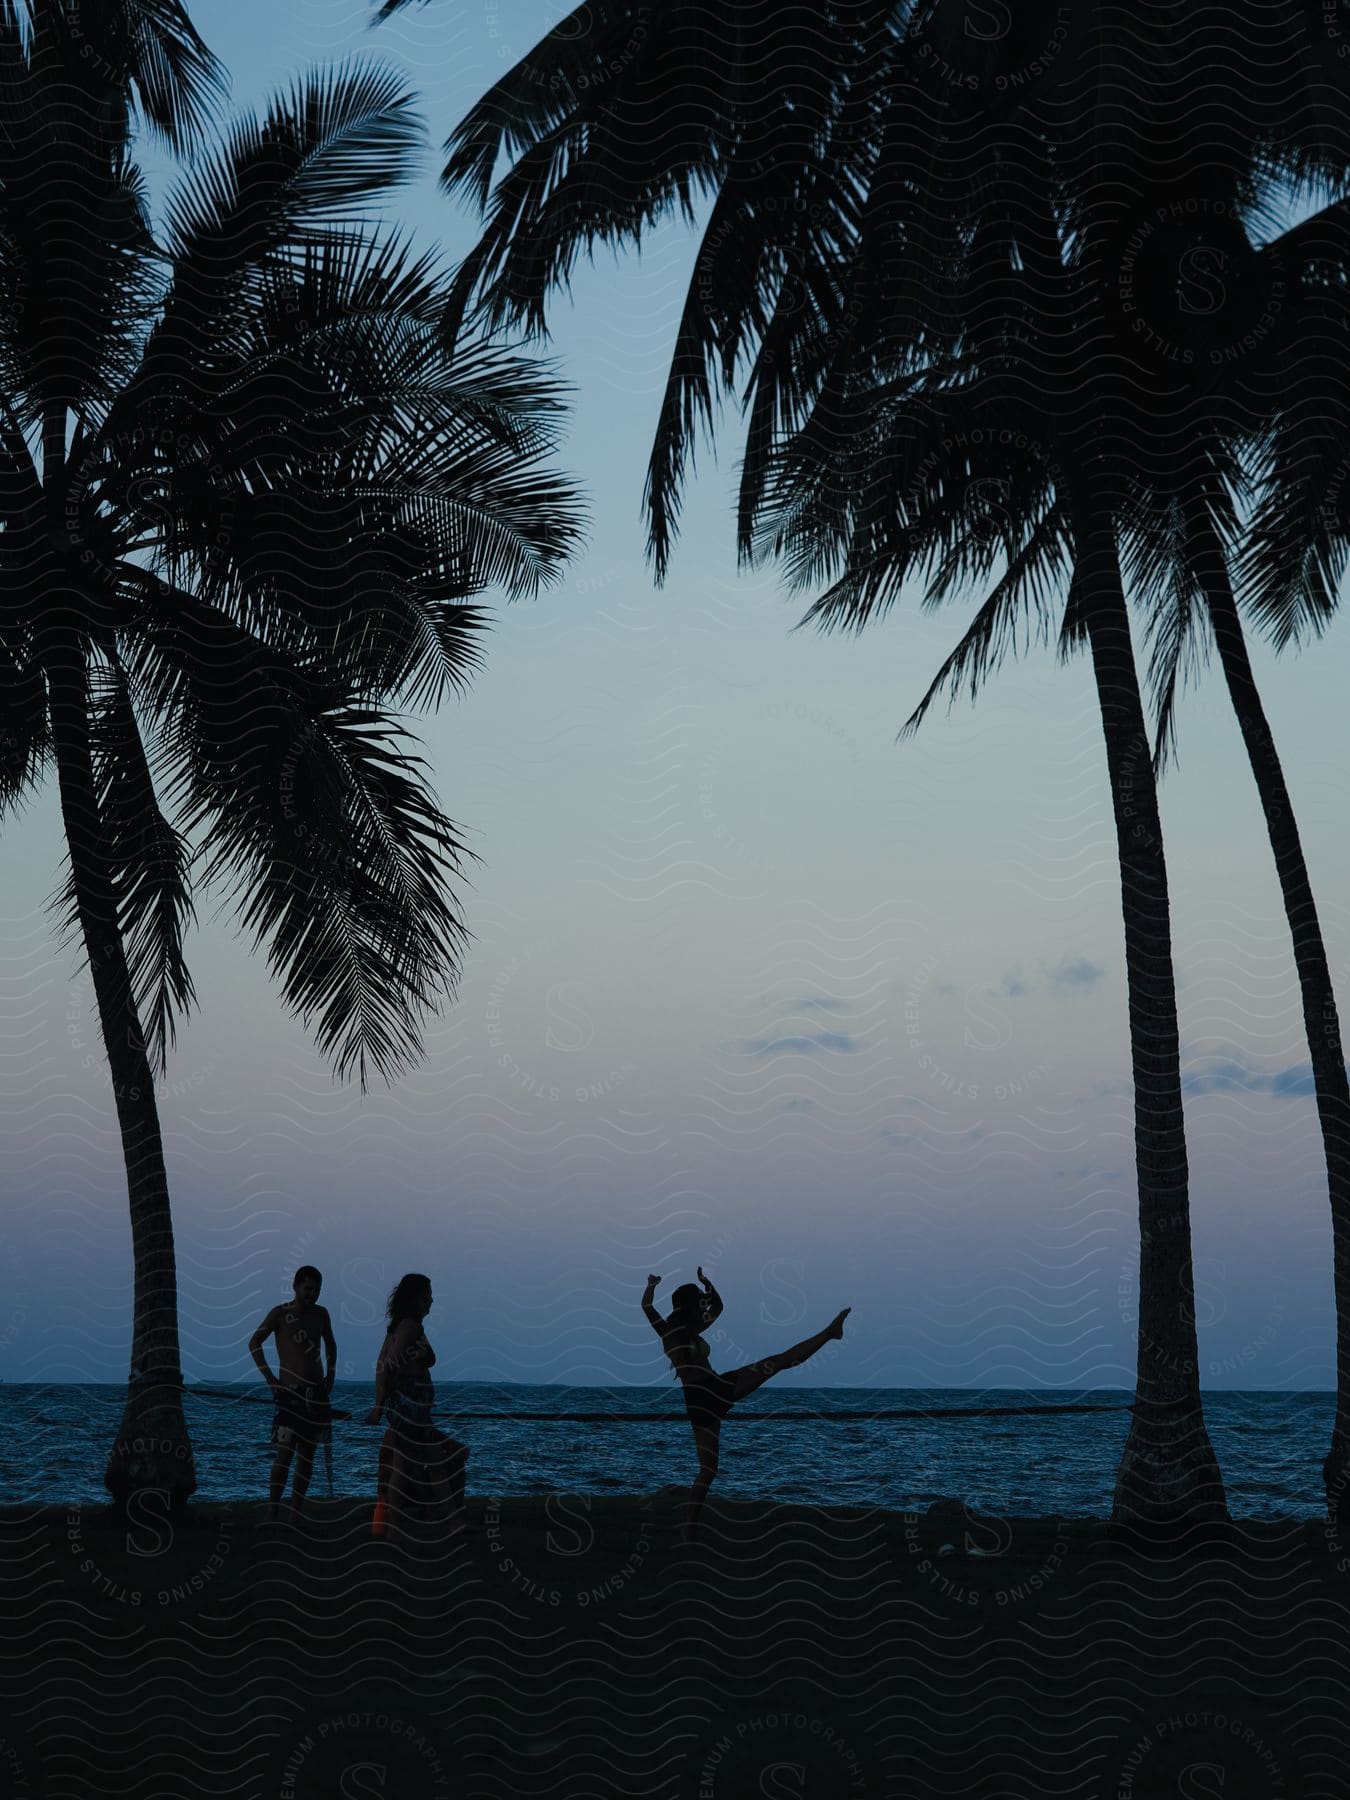 People standing on the beach near palm trees